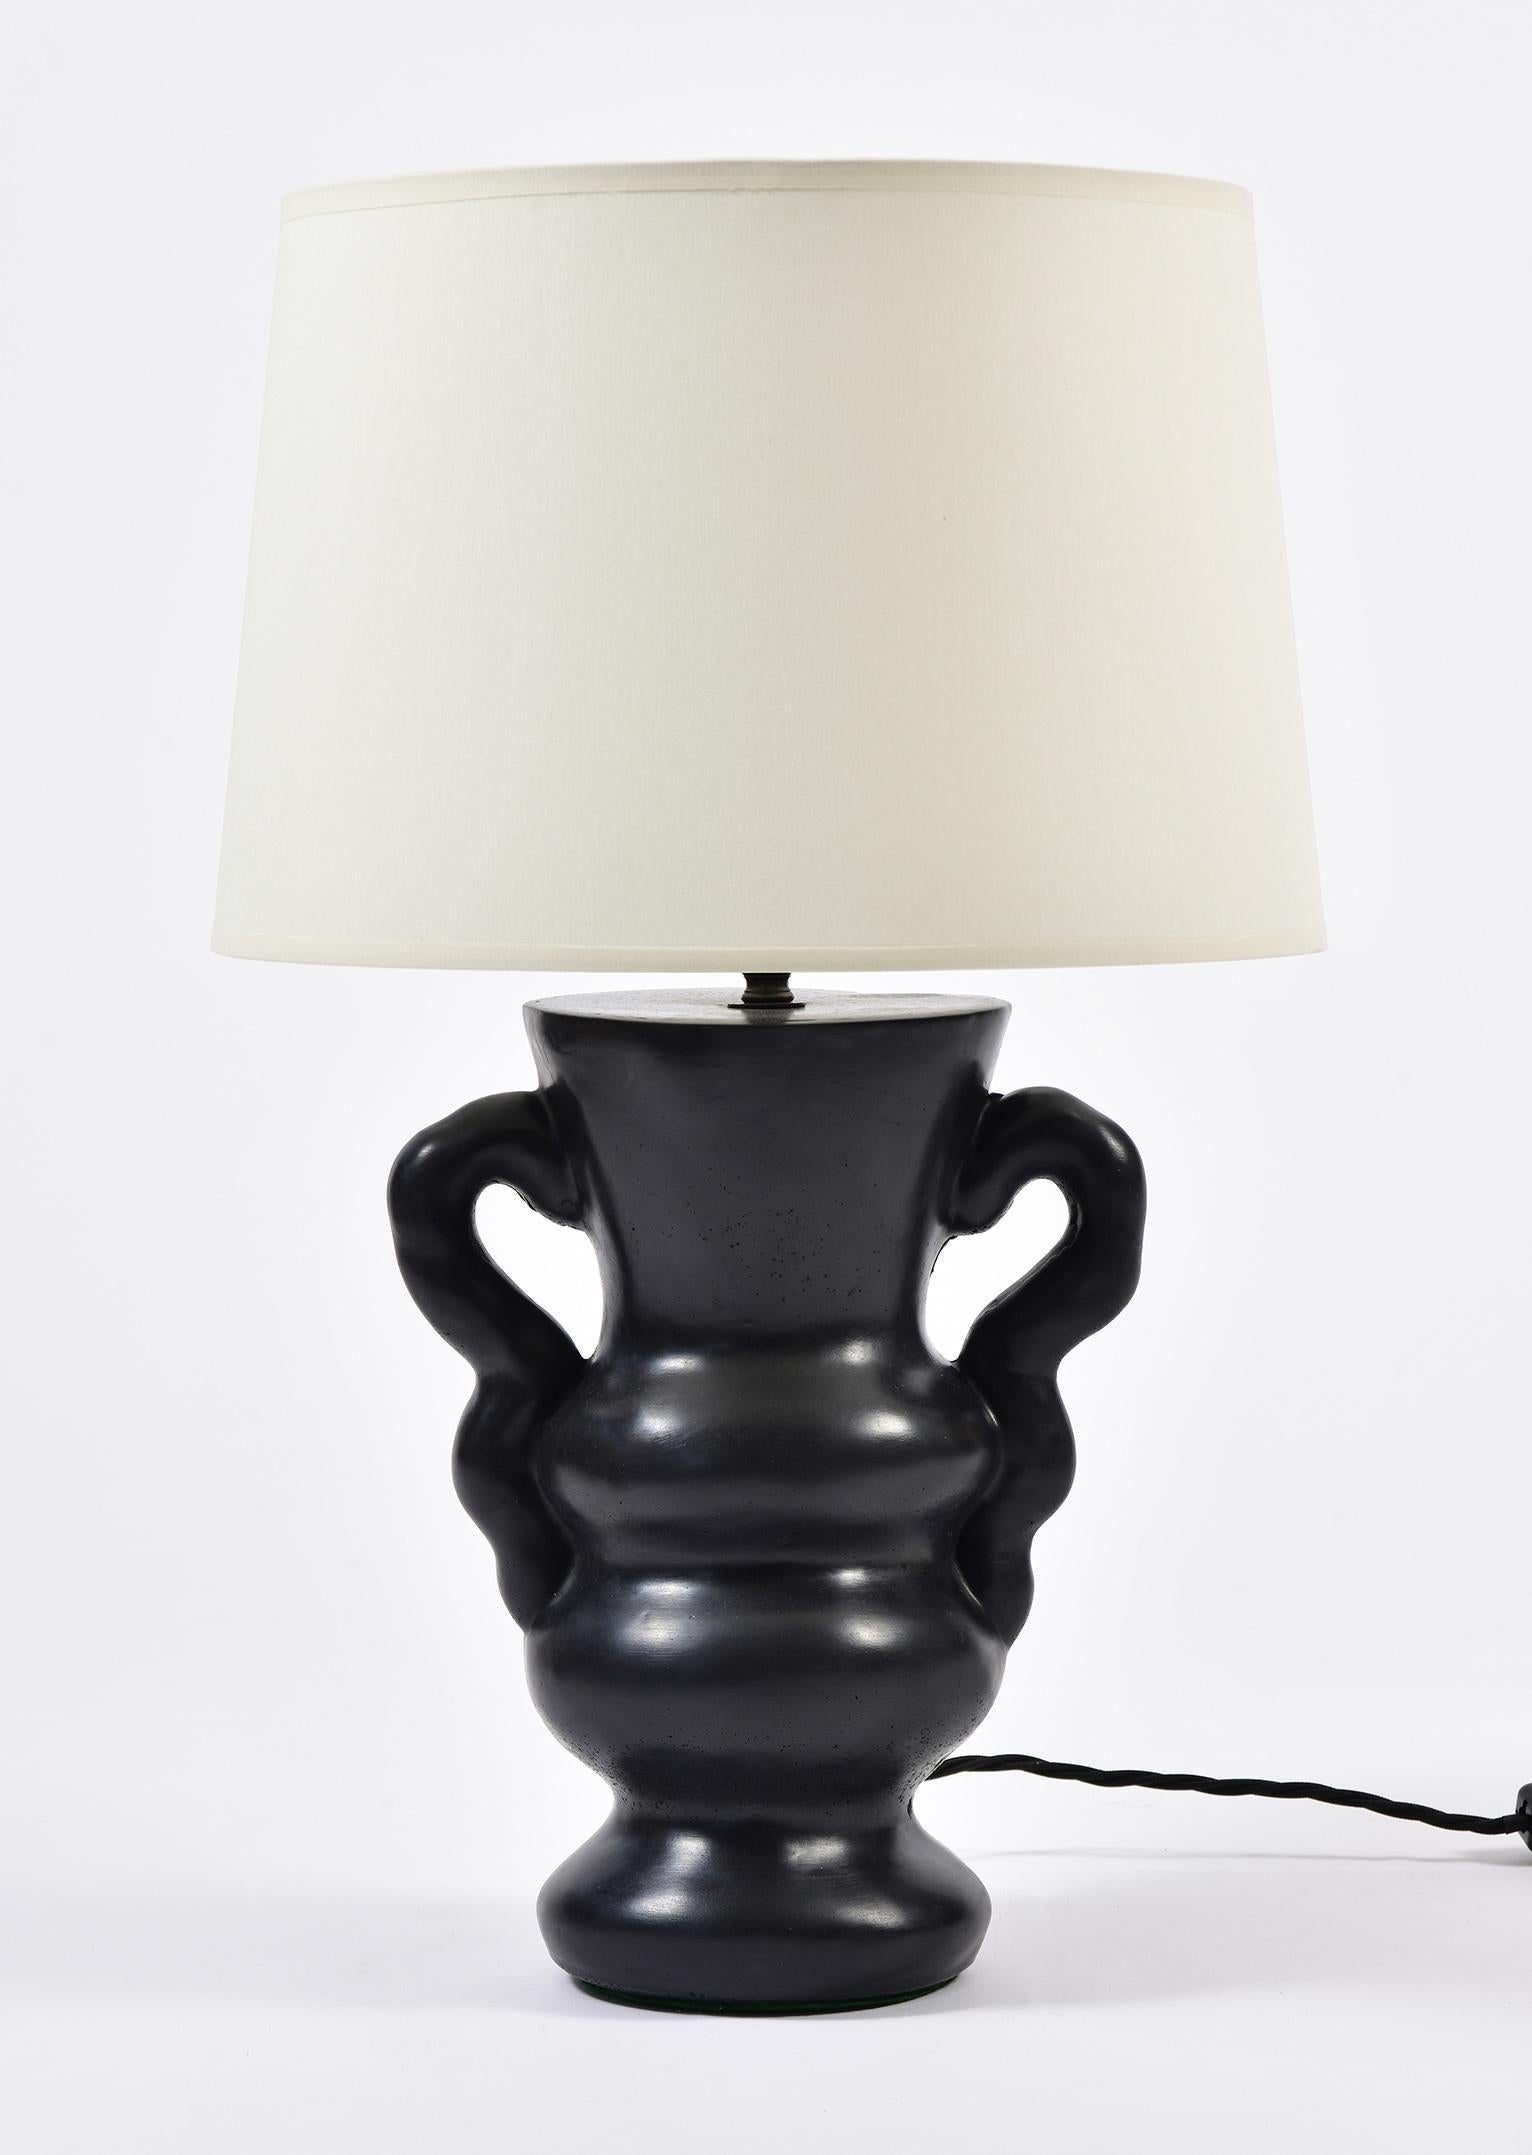 A pair of Ysolde table lamps, by Dorian Caffot de Fawes 
Hand cast in London, black stained in the mass polished and waxed high quality plaster, with a bespoke ivory fabric tapered shade
The shade is included in the stated dimensions.